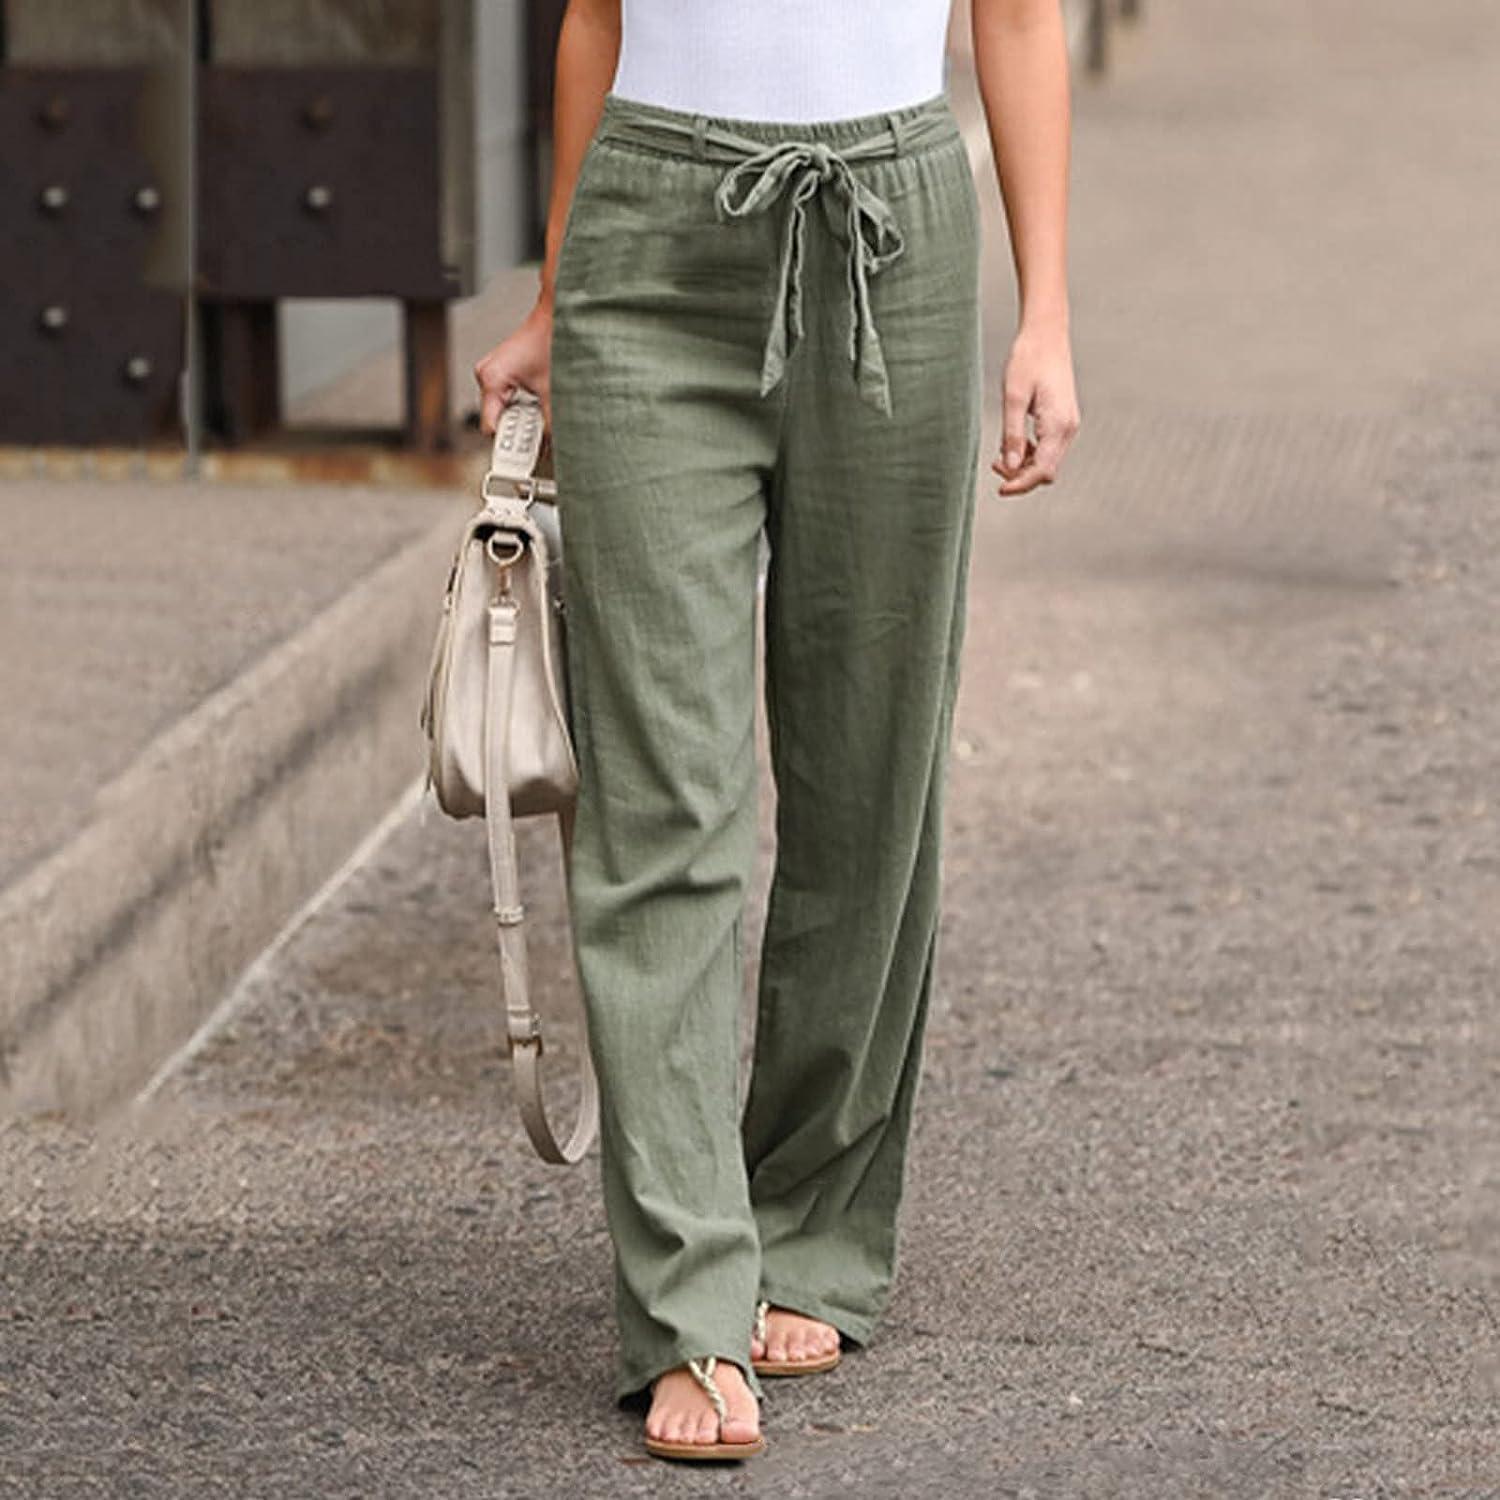 The Palazzo Pants Guide for Petite Women - Petite Dressing